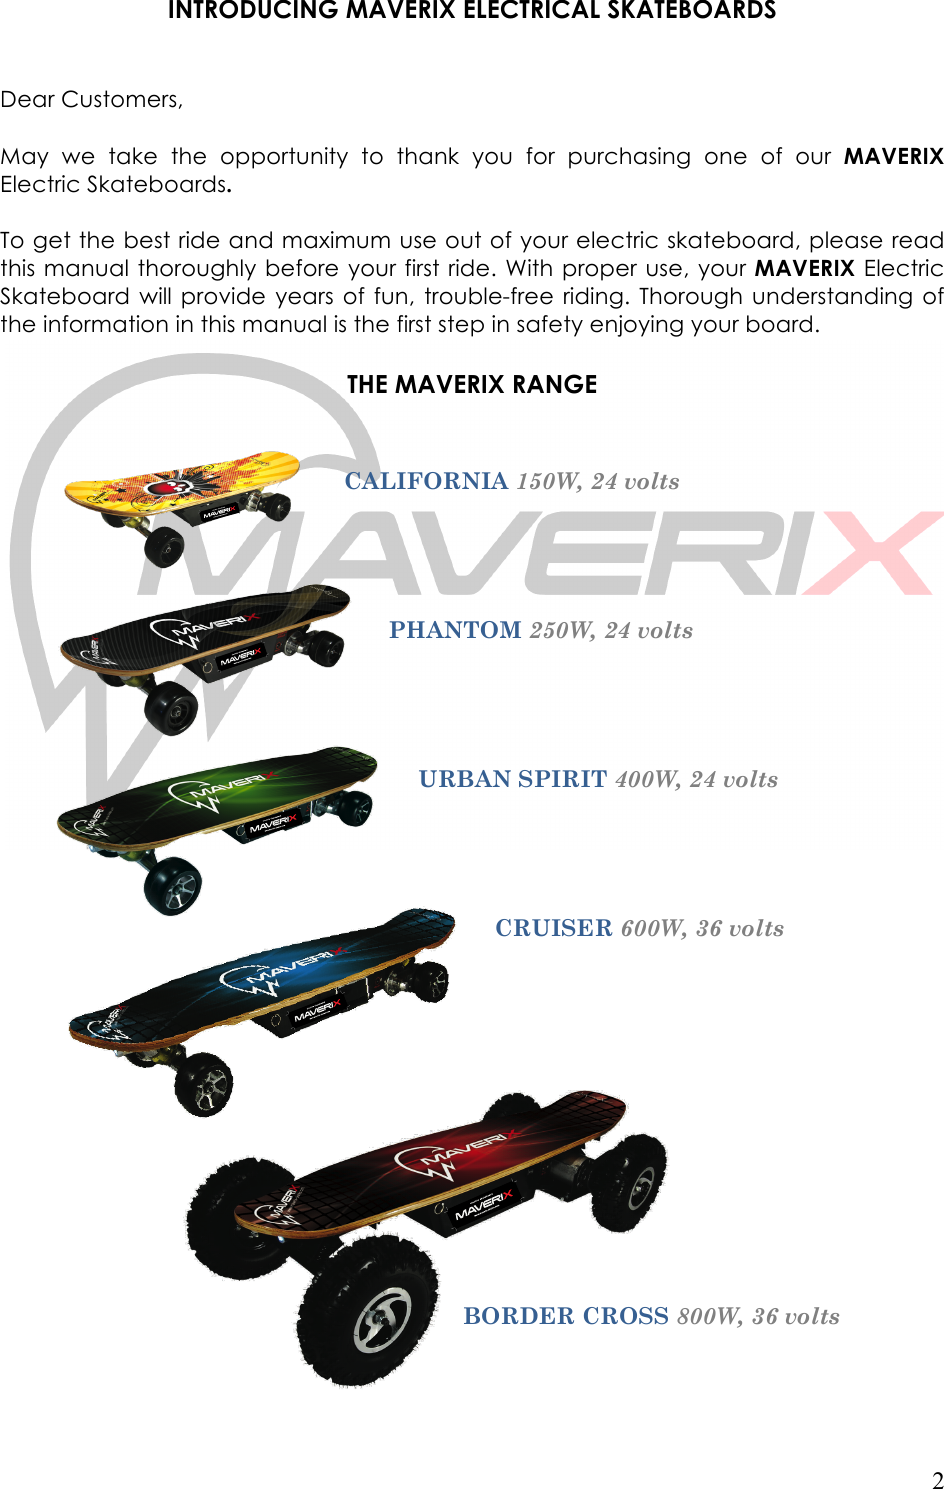   2  INTRODUCING MAVERIX ELECTRICAL SKATEBOARDS   Dear Customers,  May  we  take  the  opportunity  to  thank  you  for  purchasing  one  of  our MAVERIX Electric Skateboards.  To get the best ride and maximum use out of your electric skateboard, please read this manual thoroughly before your first ride. With proper use, your MAVERIX Electric Skateboard  will provide years  of fun, trouble-free  riding.  Thorough  understanding of the information in this manual is the first step in safety enjoying your board.   THE MAVERIX RANGE   !CALIFORNIA 150W, 24 volts PHANTOM 250W, 24 volts URBAN SPIRIT 400W, 24 volts CRUISER 600W, 36 volts BORDER CROSS 800W, 36 volts 